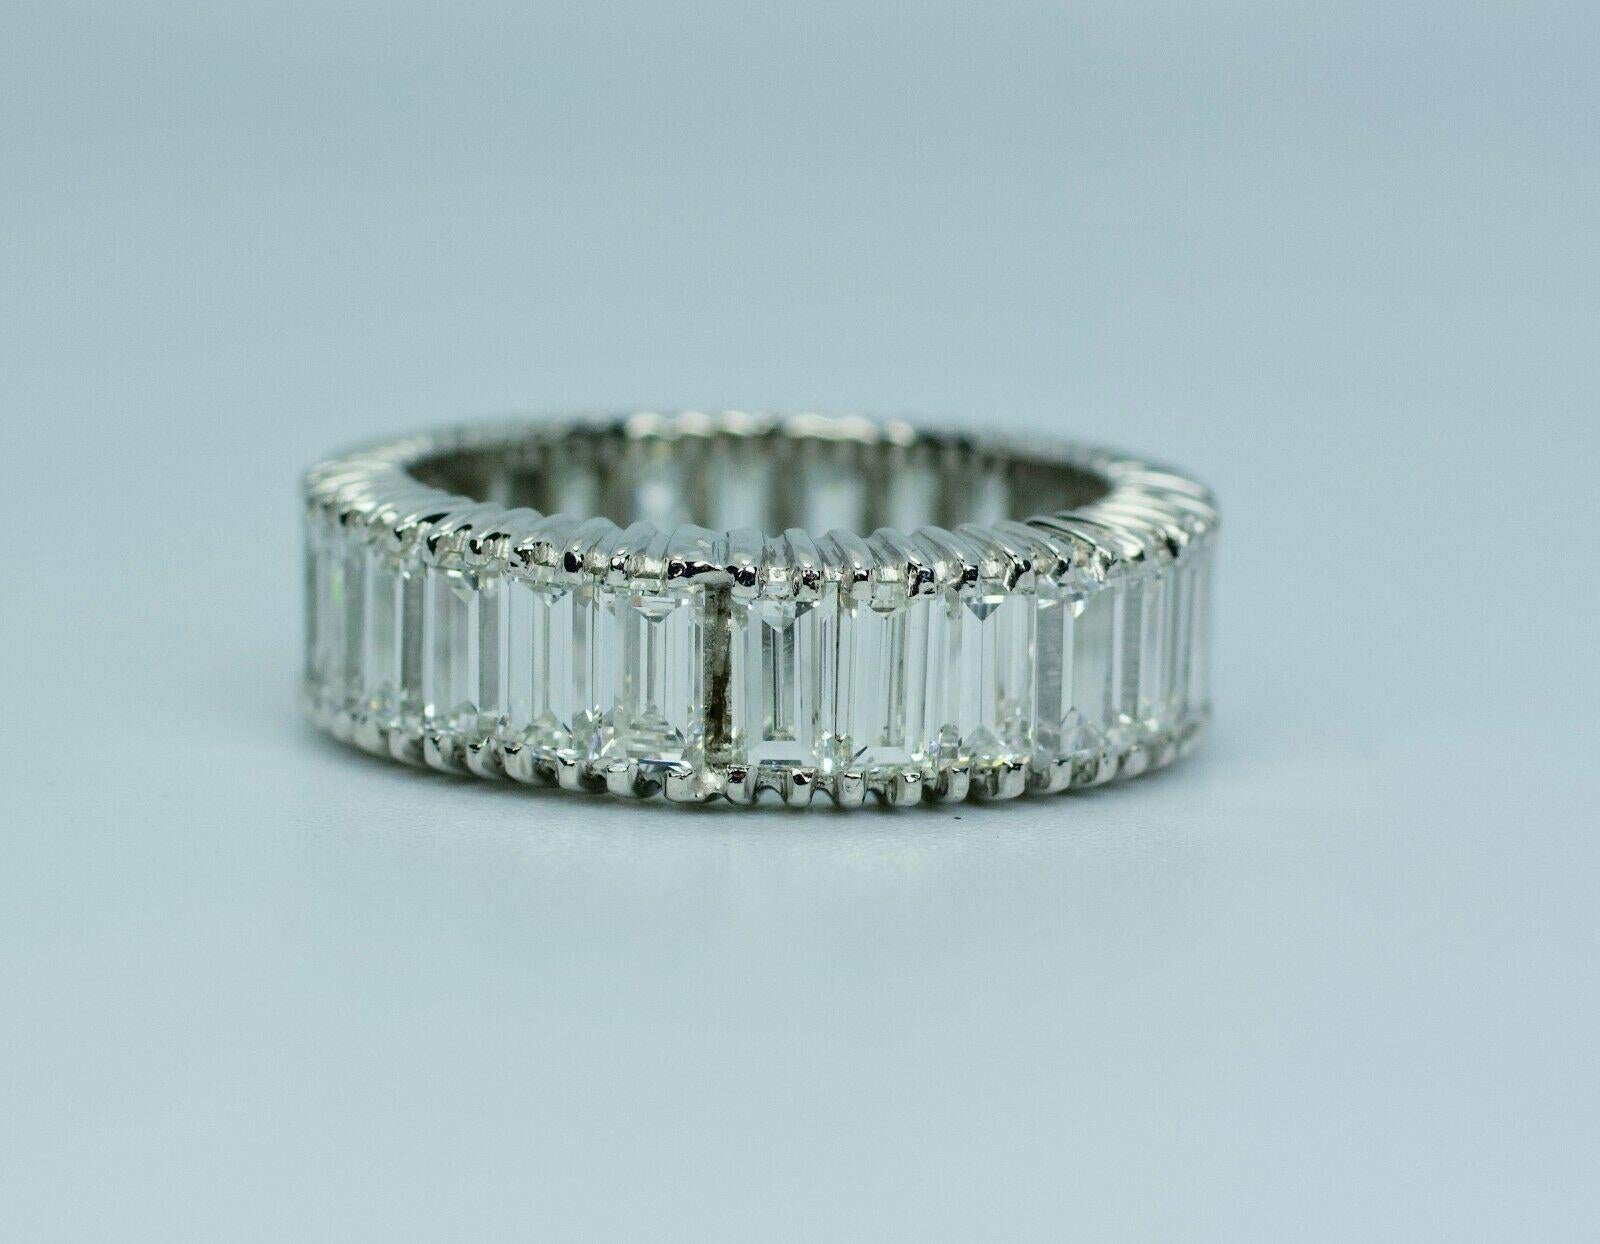 Platinum Baguette Cut Diamond Eternity Band
Baguette Cut White Diamonds
Size 5.25
3 Carats Total Weight
Color: D-F Clarity: Vs1-VS2
This is a beautiful Ring that showcases these flawless baguette cut white diamonds. There is one spot where there is